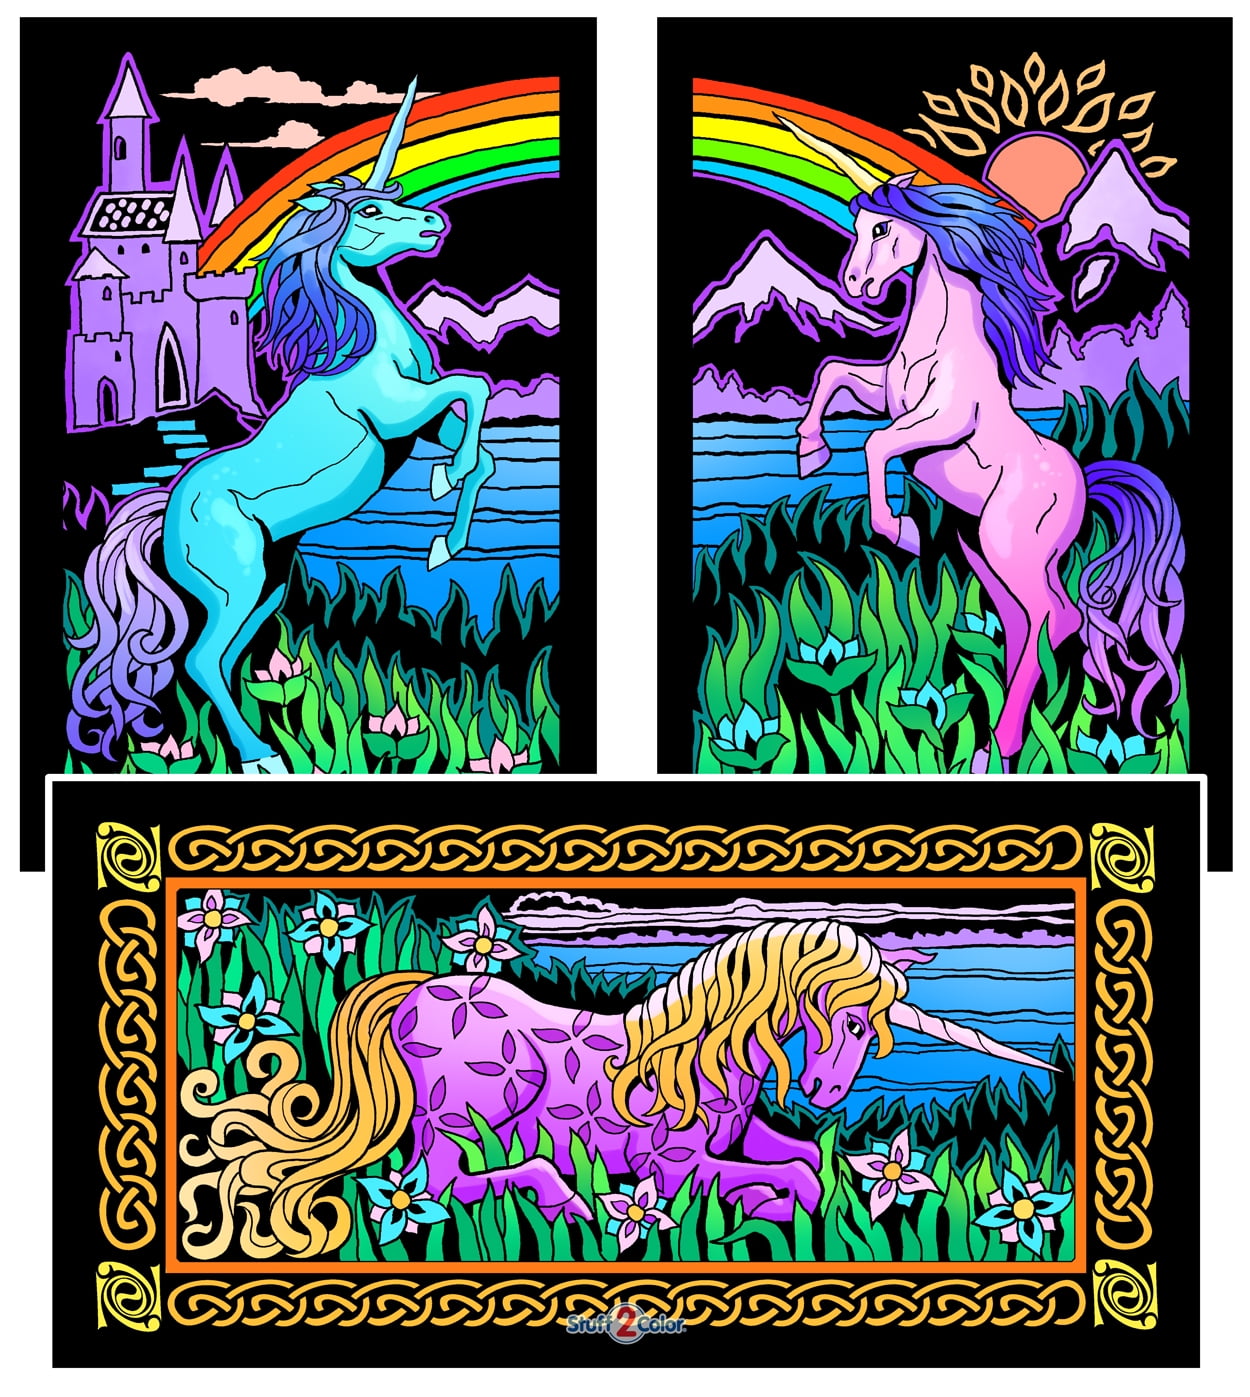 Unicorns - 3 Pack - Fuzzy Velvet Coloring Poster (3 Small Designs